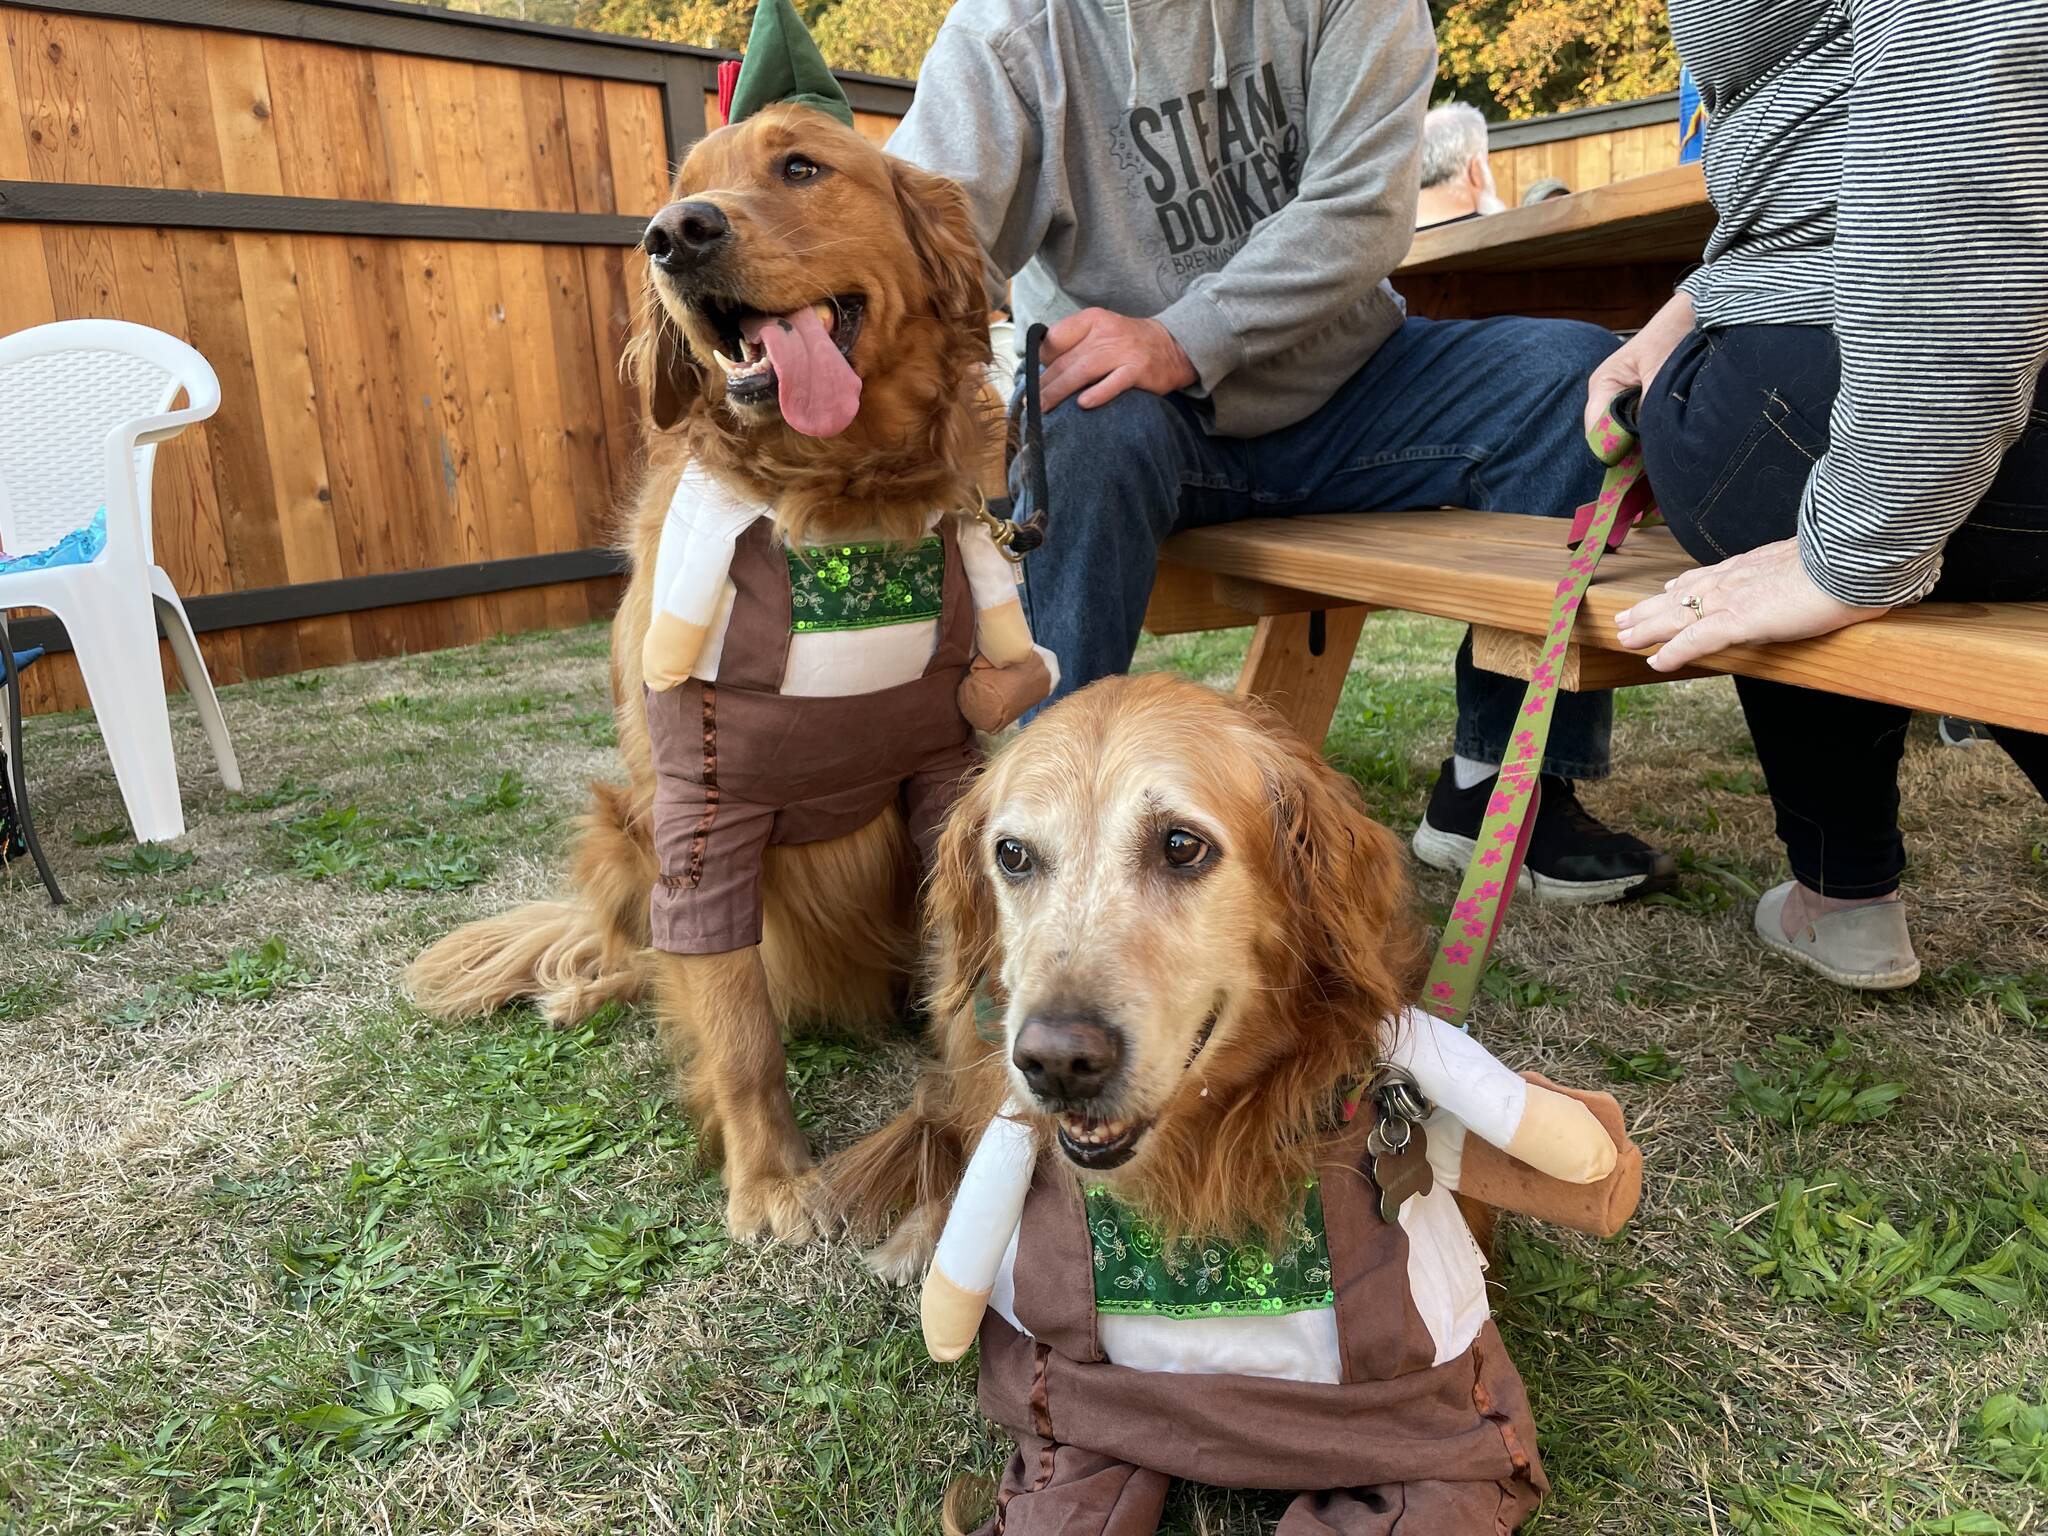 Sage and Mia do important dog things at Pints for Paws, a fundraiser put on by PAWS of Grays Harbor to help replace ailing infrastructure in the shelter, hosted by Red Cedar on Oct. 8. (Michael S. Lockett | The Daily World)